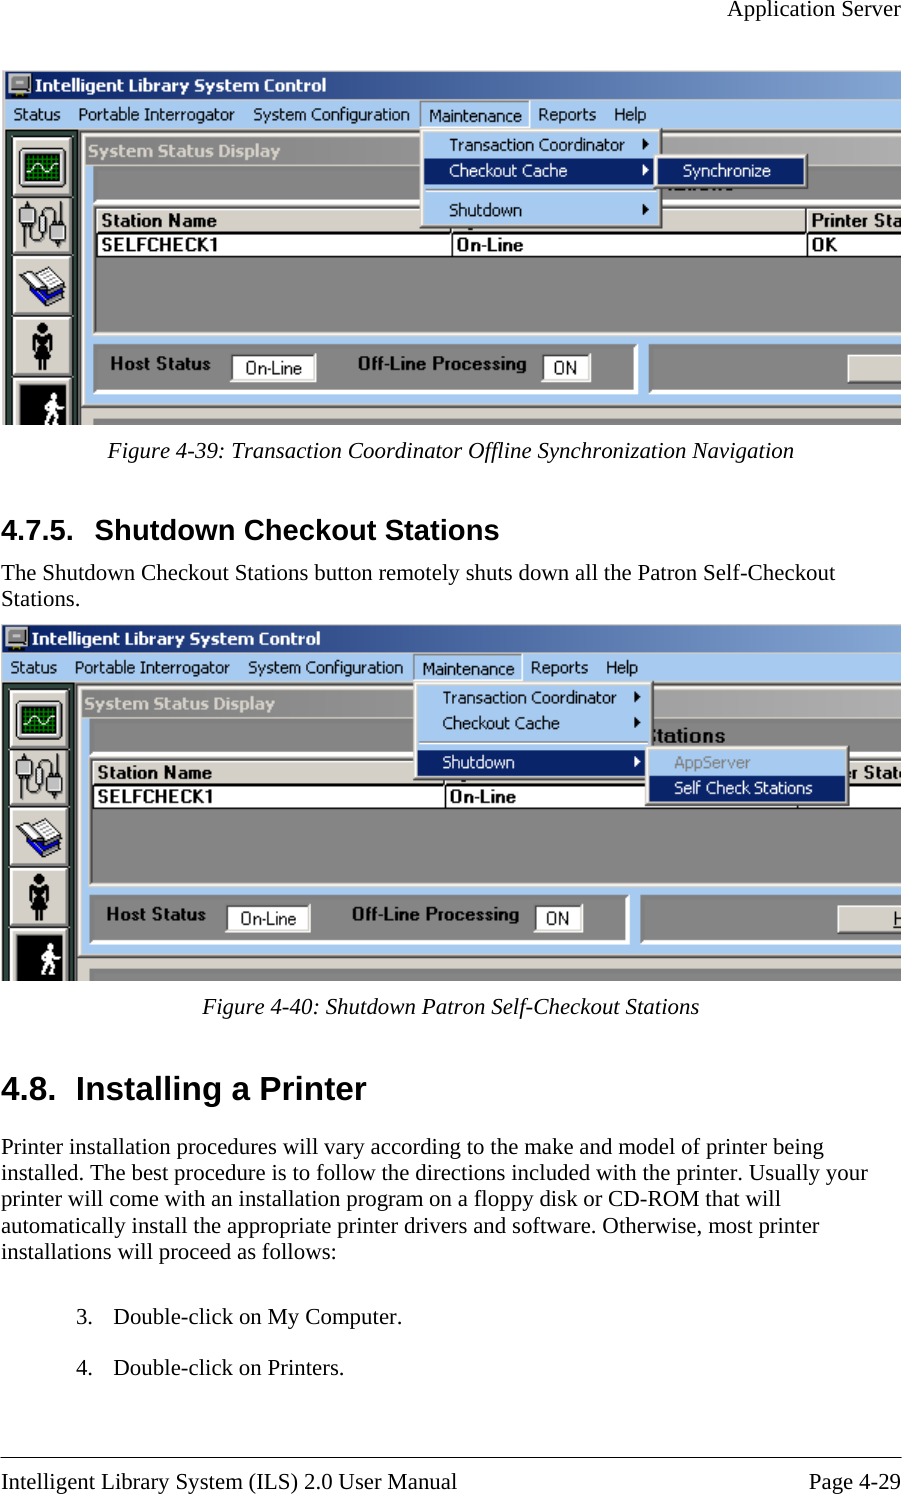   Application Server   Figure 4-39: Transaction Coordinator Offline Synchronization Navigation 4.7.5.  SThe Shutdown Checkout S ts down all the Patron Self-Checkout Stationshutdown Checkout Stations  tations button remotely shu.  Figure 4-40: Shutdown Patron Self-Checkout Stations talling a Printer 4.8.  InsPrinter installation procedures will varyThe best procedure is to follow the directions included with the printer. Usually your l come with an installation program on a floppy disk or CD-ROM that will  as follows: er. 4.  Double-click on Printers.  according to the make and model of printer being installed. printer wilautomatically install the appropriate printer drivers and software. Otherwise, most printer installations will proceed 3.  Double-click on My Comput Intelligent Library System (ILS) 2.0 User Manual  Page 4-29 